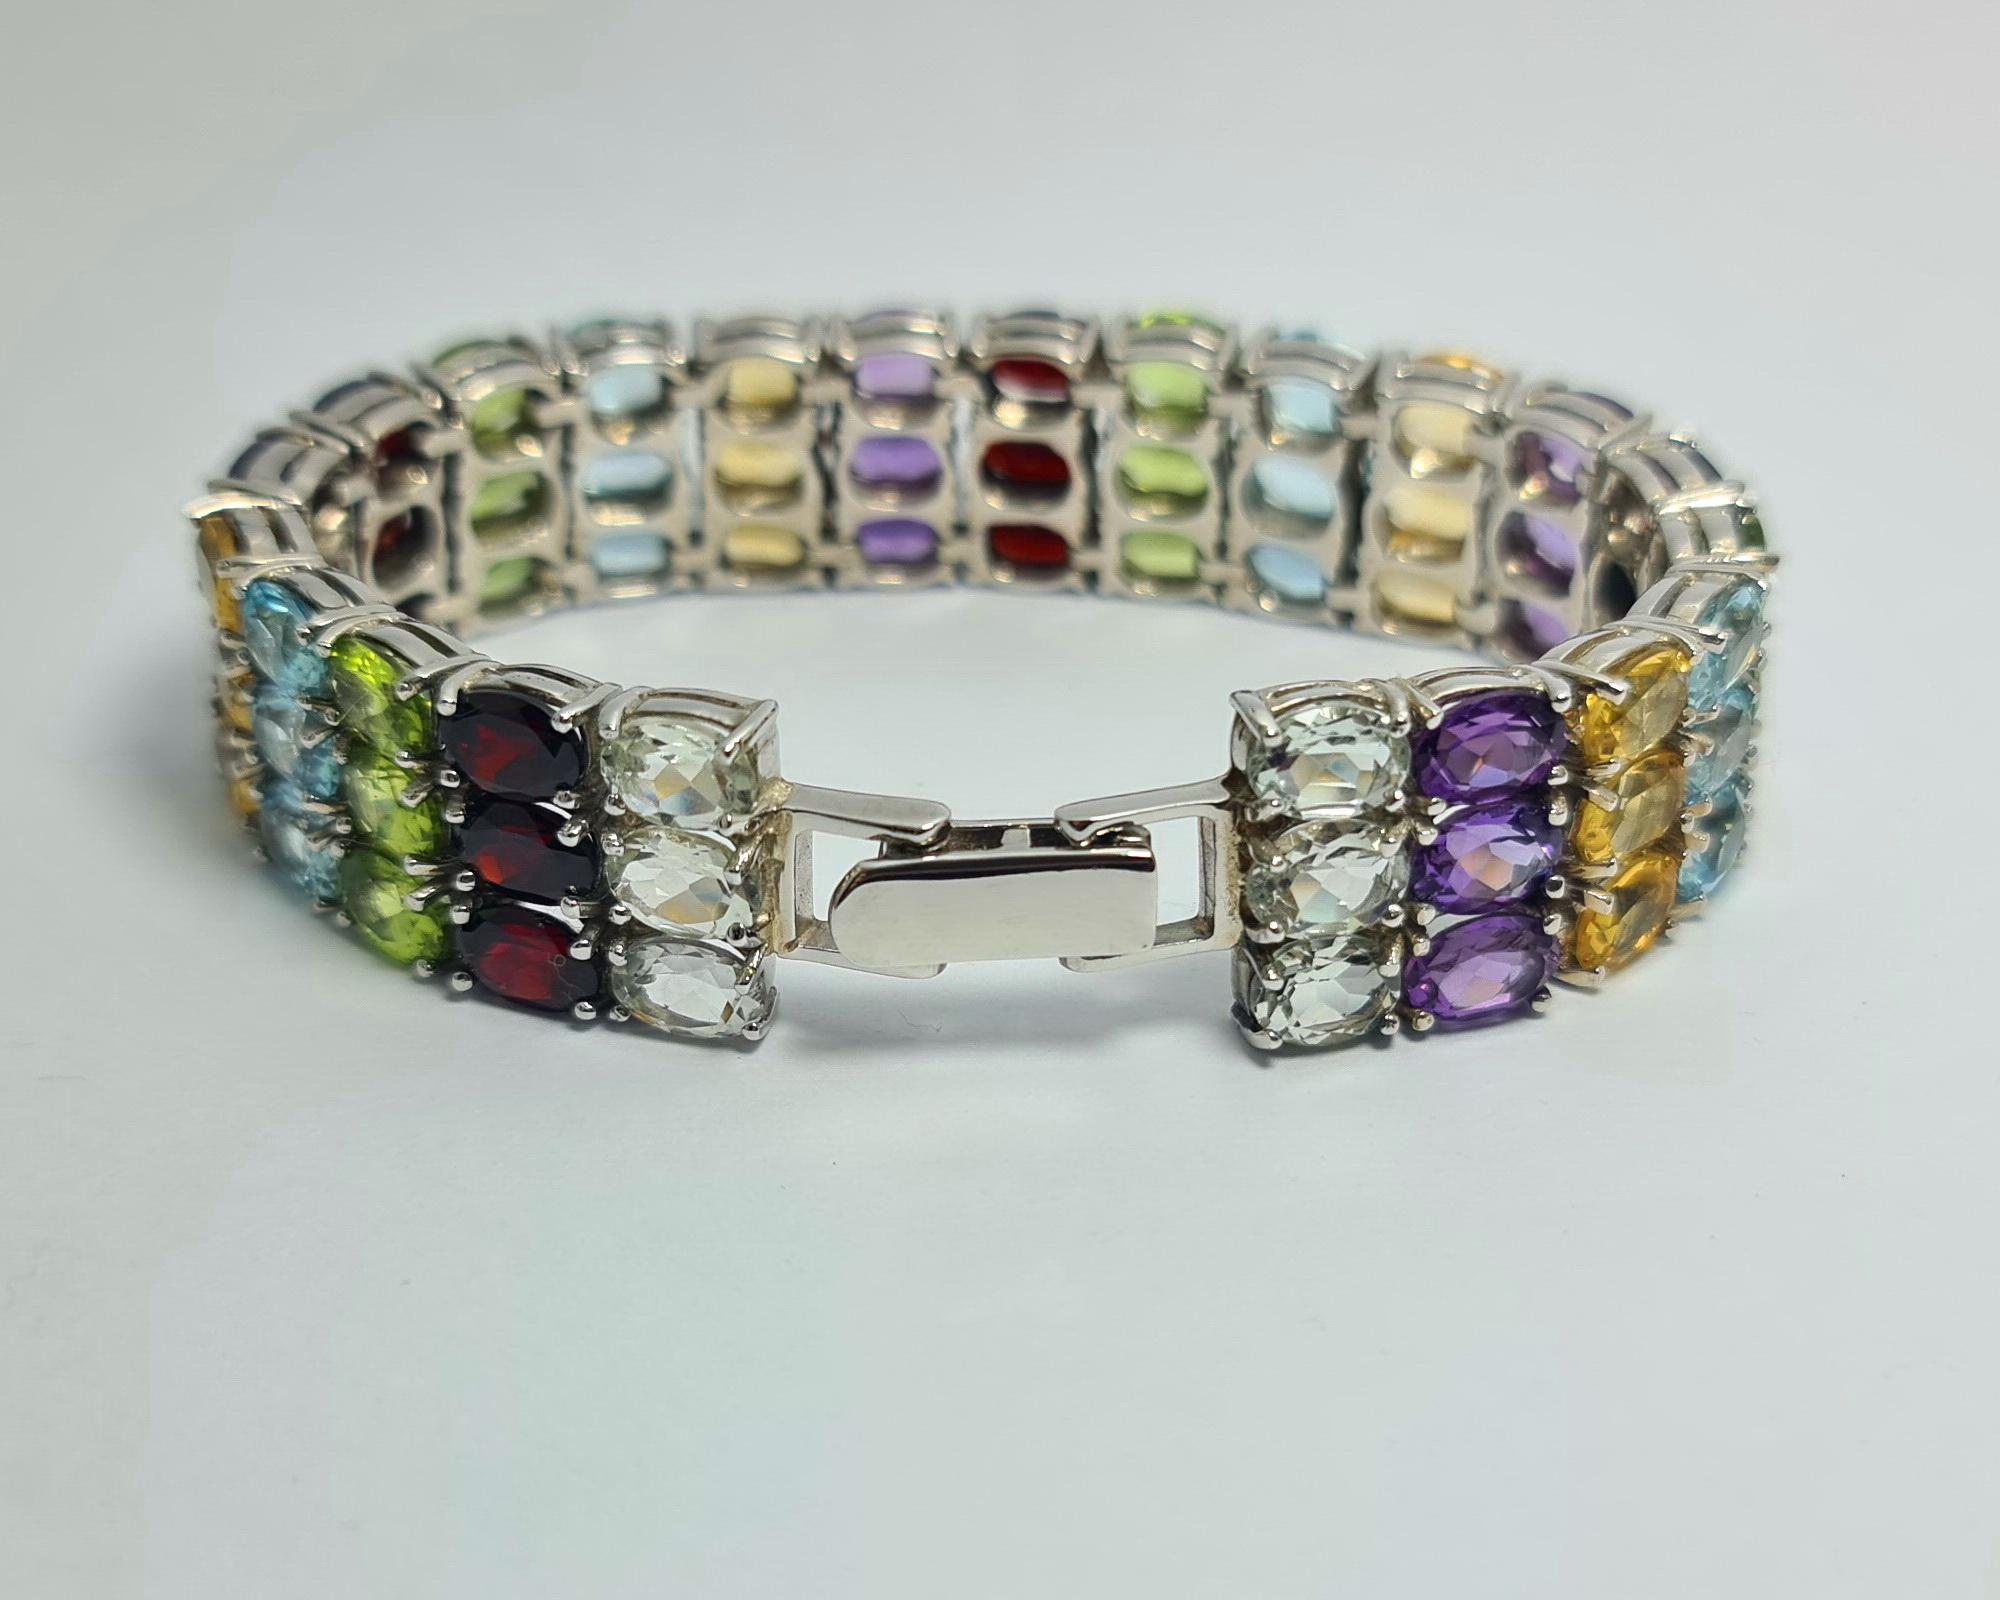 65 Cts Natural Garnet ,Topaz.Peridot,Amethyst and Prasiolite set in Pure .925 Sterling Silver Rhodium Plated 7”  3 Row Bracelet 